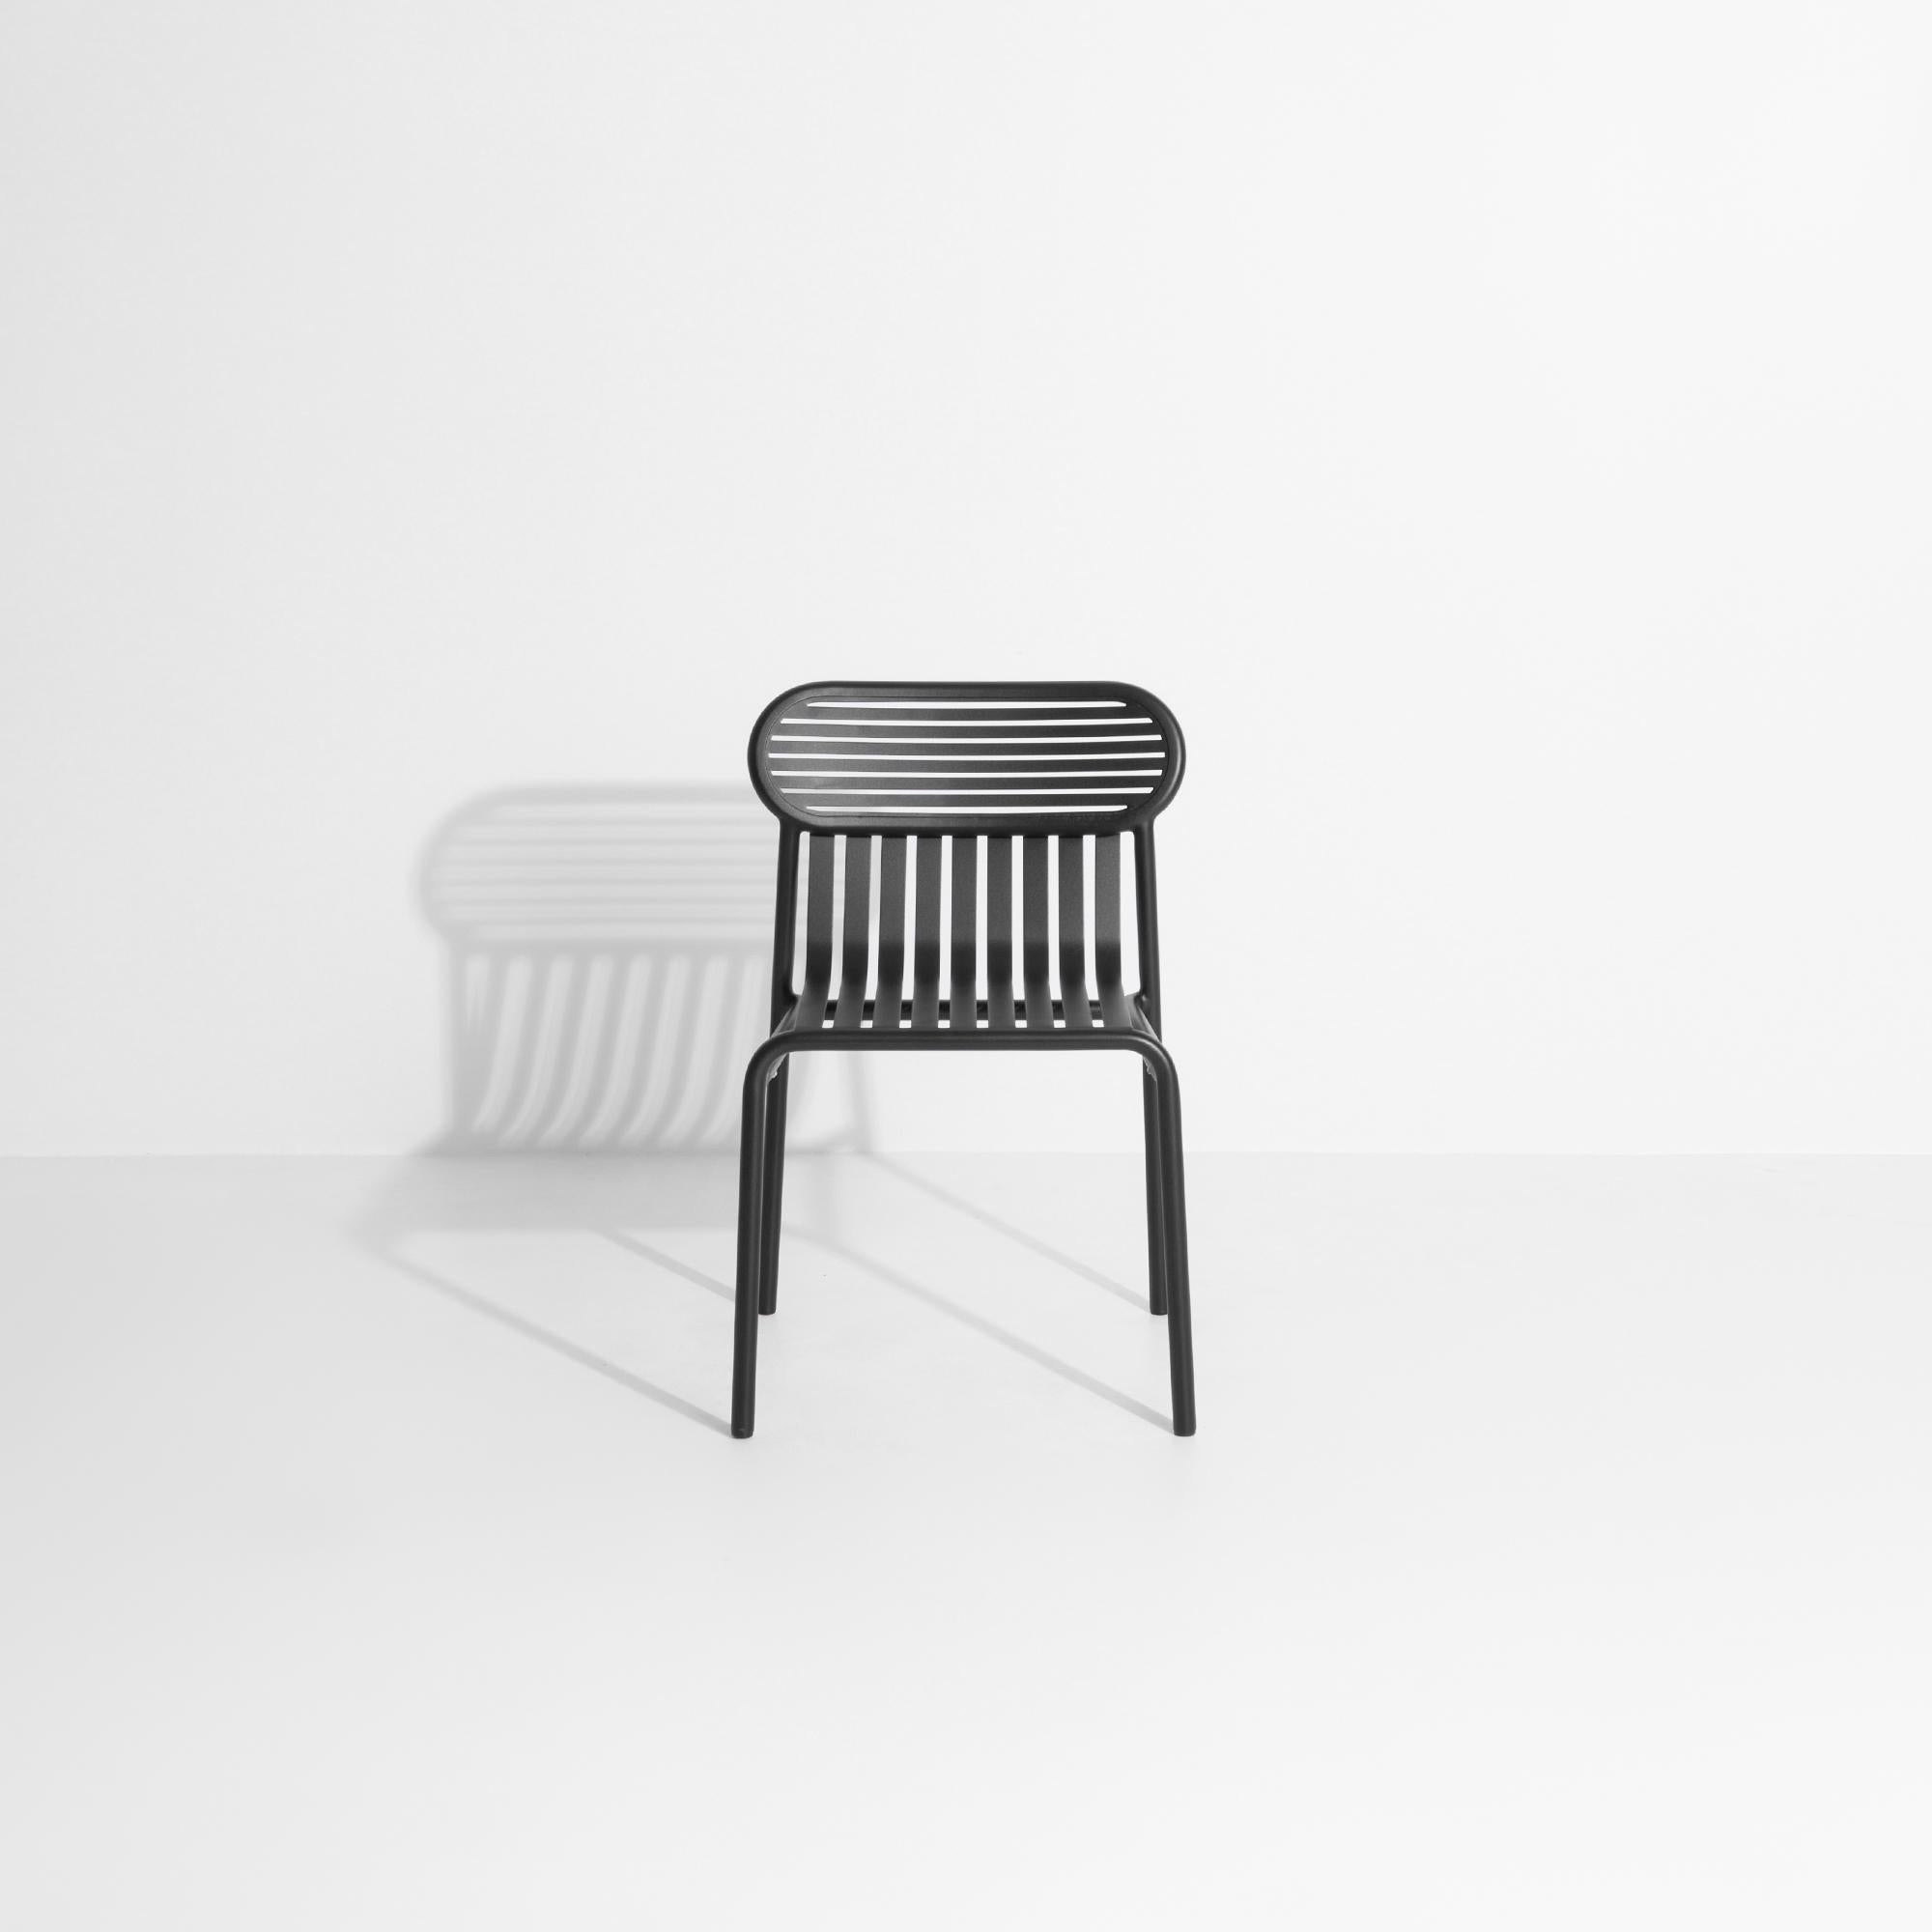 Petite Friture Week-End Chair in Black Aluminium by Studio BrichetZiegler In New Condition For Sale In Brooklyn, NY